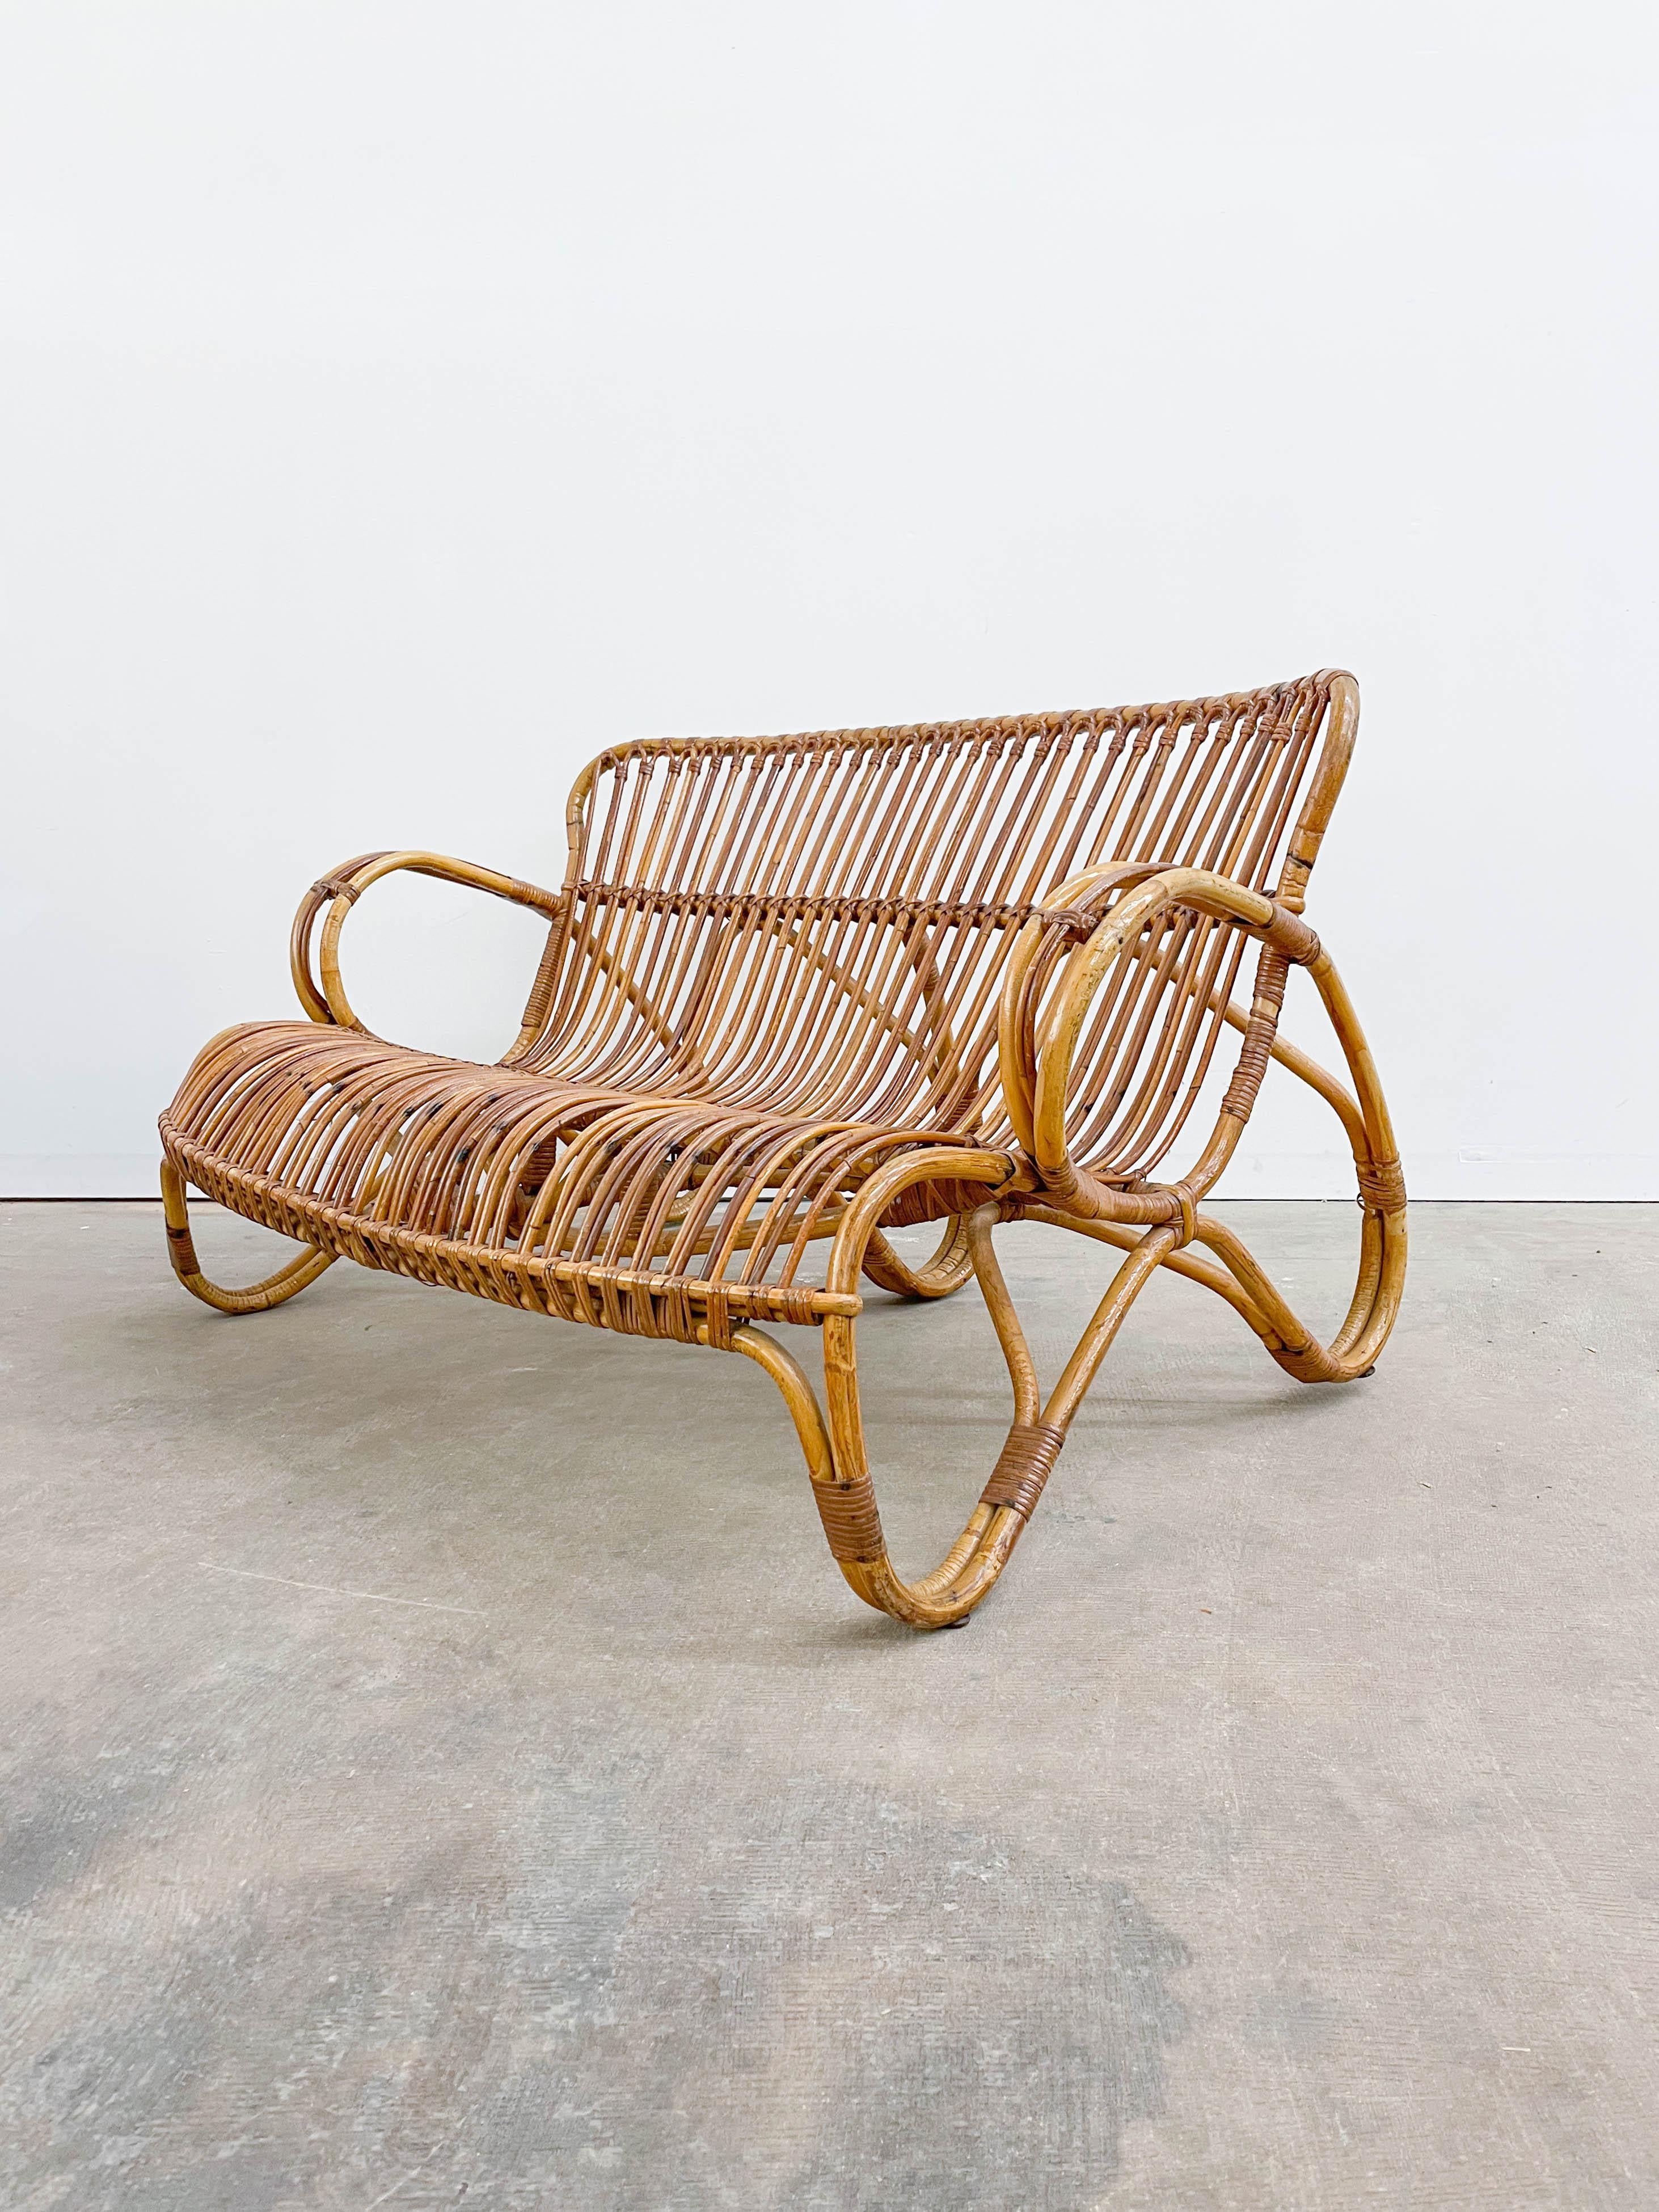 Vintage Sculptural Bamboo Sofa by Rohe Noorwolde, 1960s For Sale 4